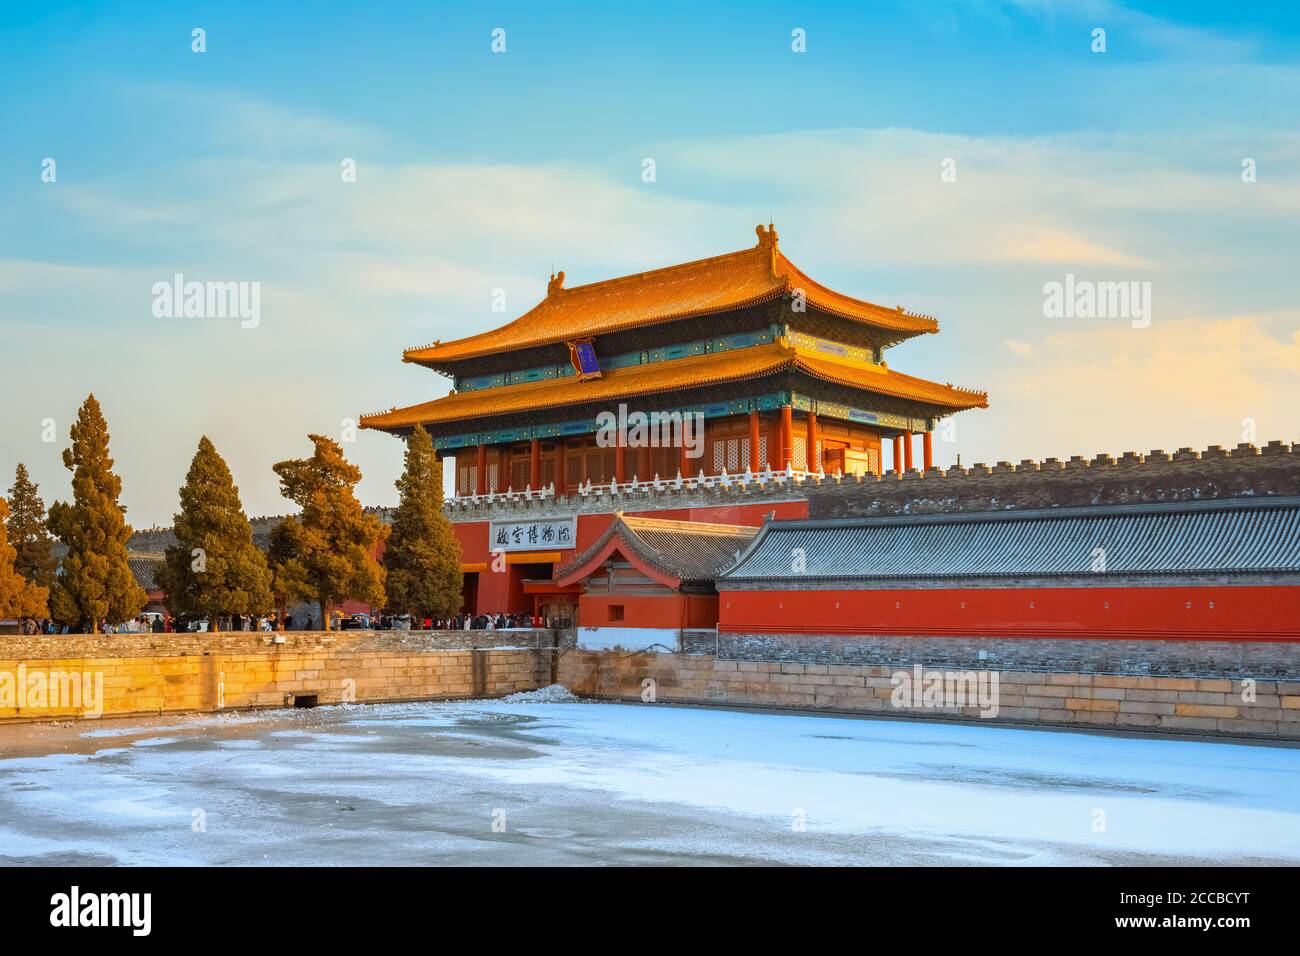 Beijing, China - Jan 9 2020: Shenwumen (Gate of Divine Prowess) built in 1420, during the 18th year of Yongle Emperor's reign, it's the back gate of t Stock Photo